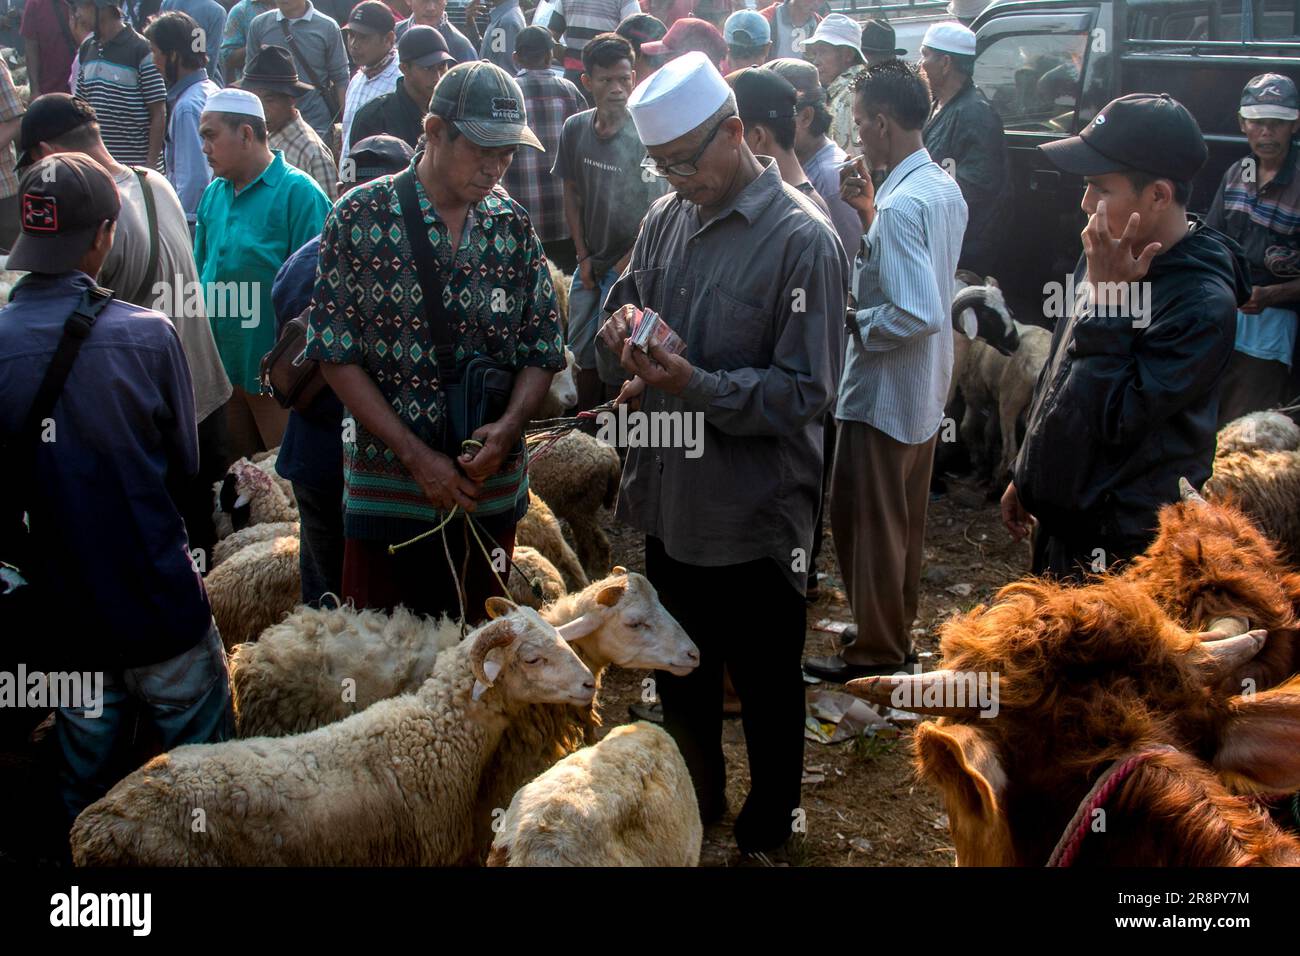 People purchase sacrificial animals at a livestock market ahead of the Muslim festival Eid Al-Adha, in Jonggol, Bogor Regency, West Java, Indonesia on June 22, 2023. Based on livestock traders data over 900 cows, 700 goats, and 600 sheep were sold at the largest livestock market in West Java. Eid al-Adha is one of the holiest Muslims holidays of the year. It marks the yearly Muslim pilgrimage, known as Hajj, to visit Mecca. During Eid al-Adha, Muslims slaughter goats, sheep and cattle in commemoration of the Prophet Abraham's readiness to sacrifice his son to show obedience to God. They split Stock Photo